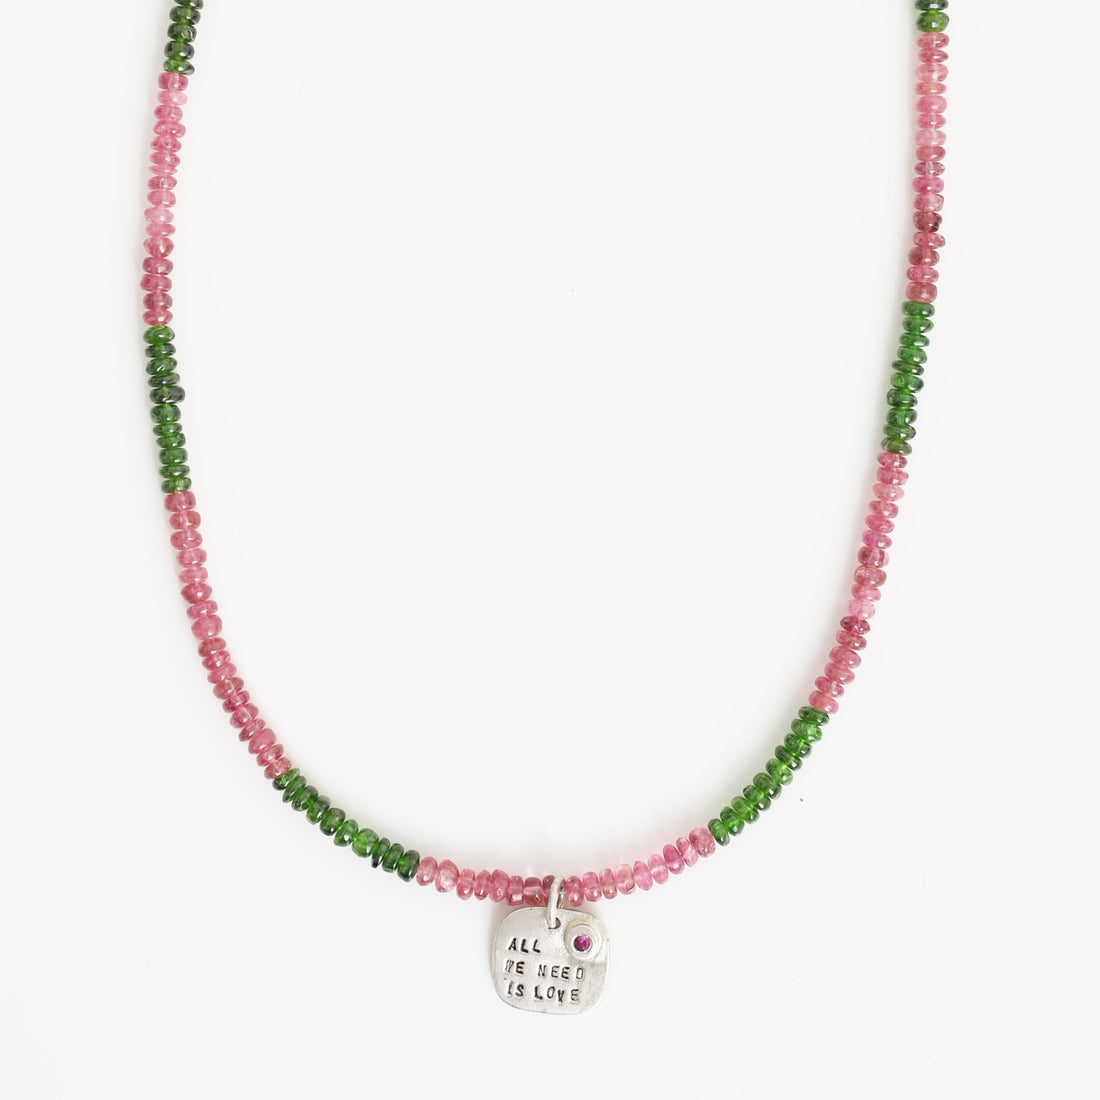 Watermelon Love Necklace with All We Need Is Love Pendant